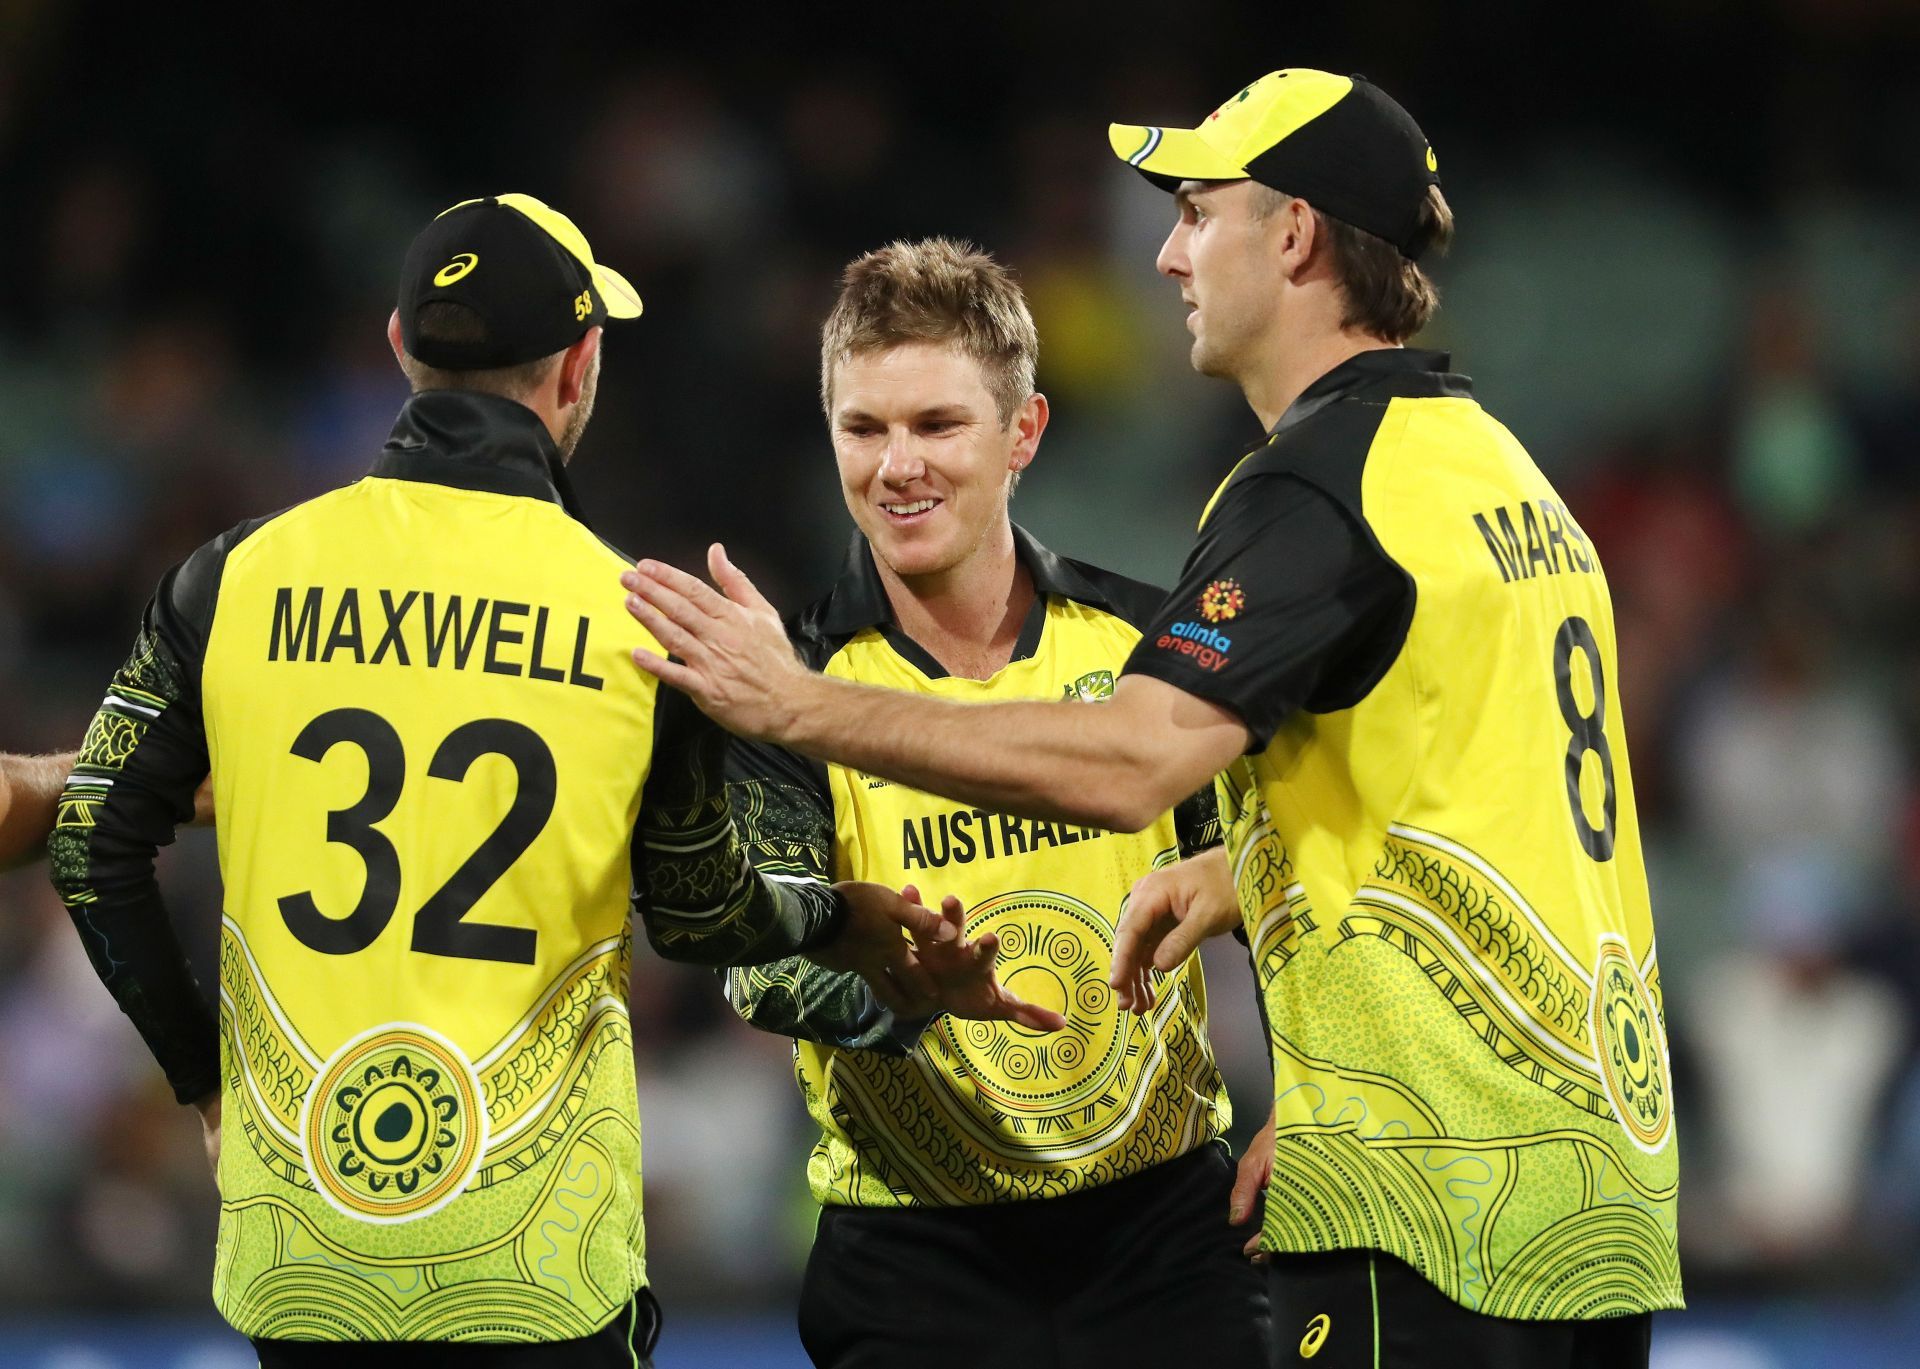 Adam Zampa took five wickets in the tournament at the economy rate of 6.66 per over